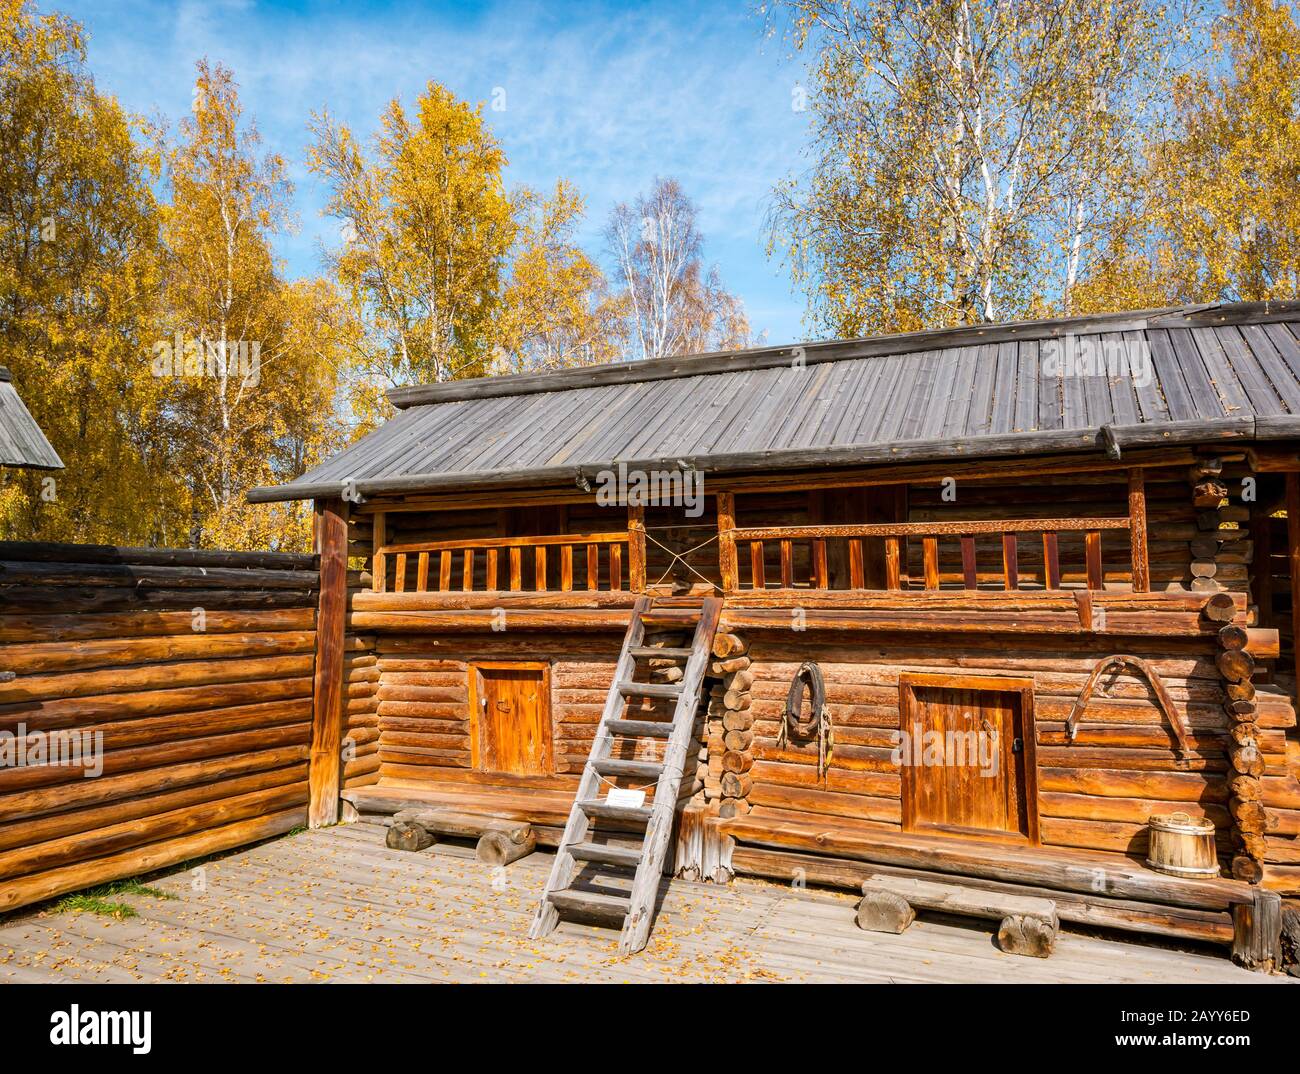 Old fashioned traditional style wooden log cabin, Taltsy Museum of Wooden Architecture, Irkutsk Region, Siberia, Russia Stock Photo